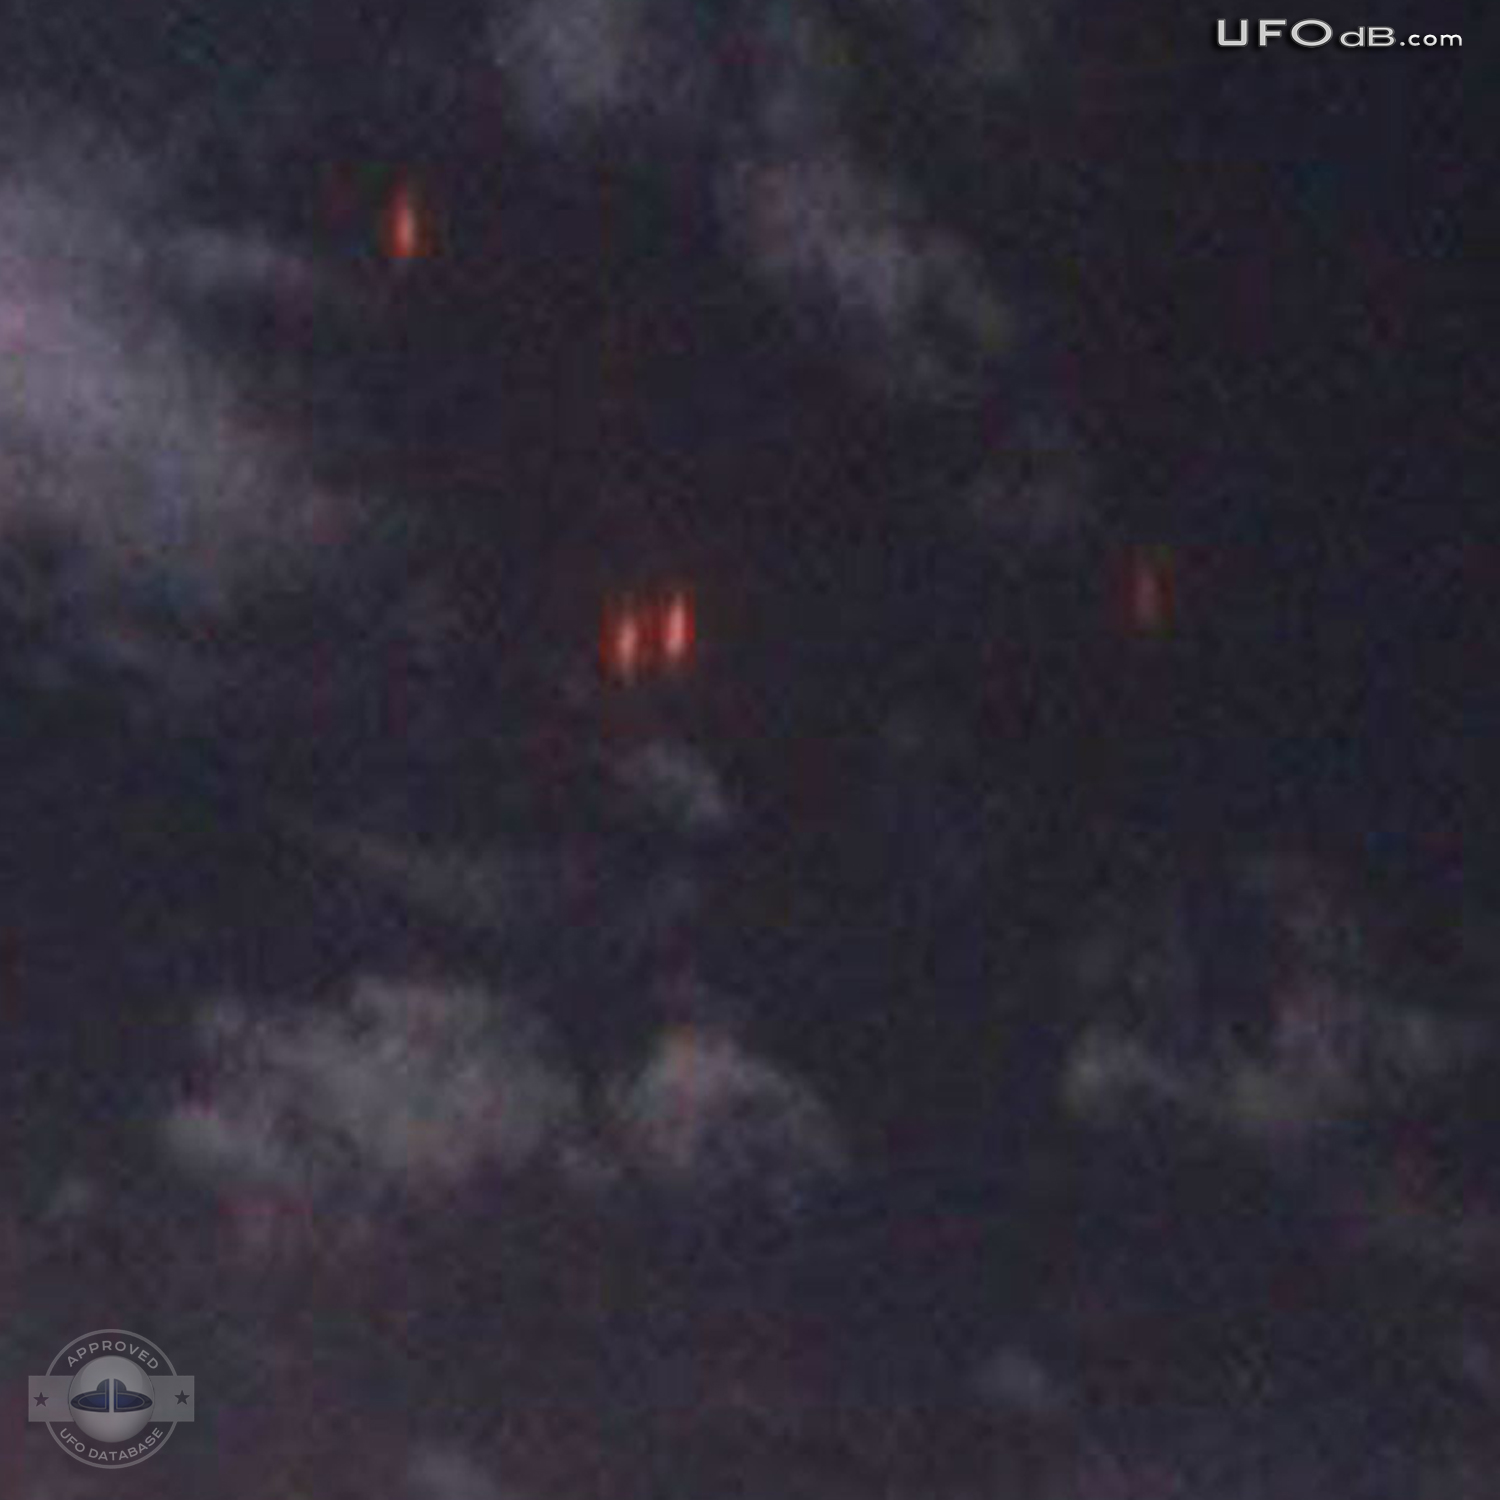 Light Pillars UFOs seen as Heavenly Signs in Bahrain | March 18 2011 UFO Picture #318-3